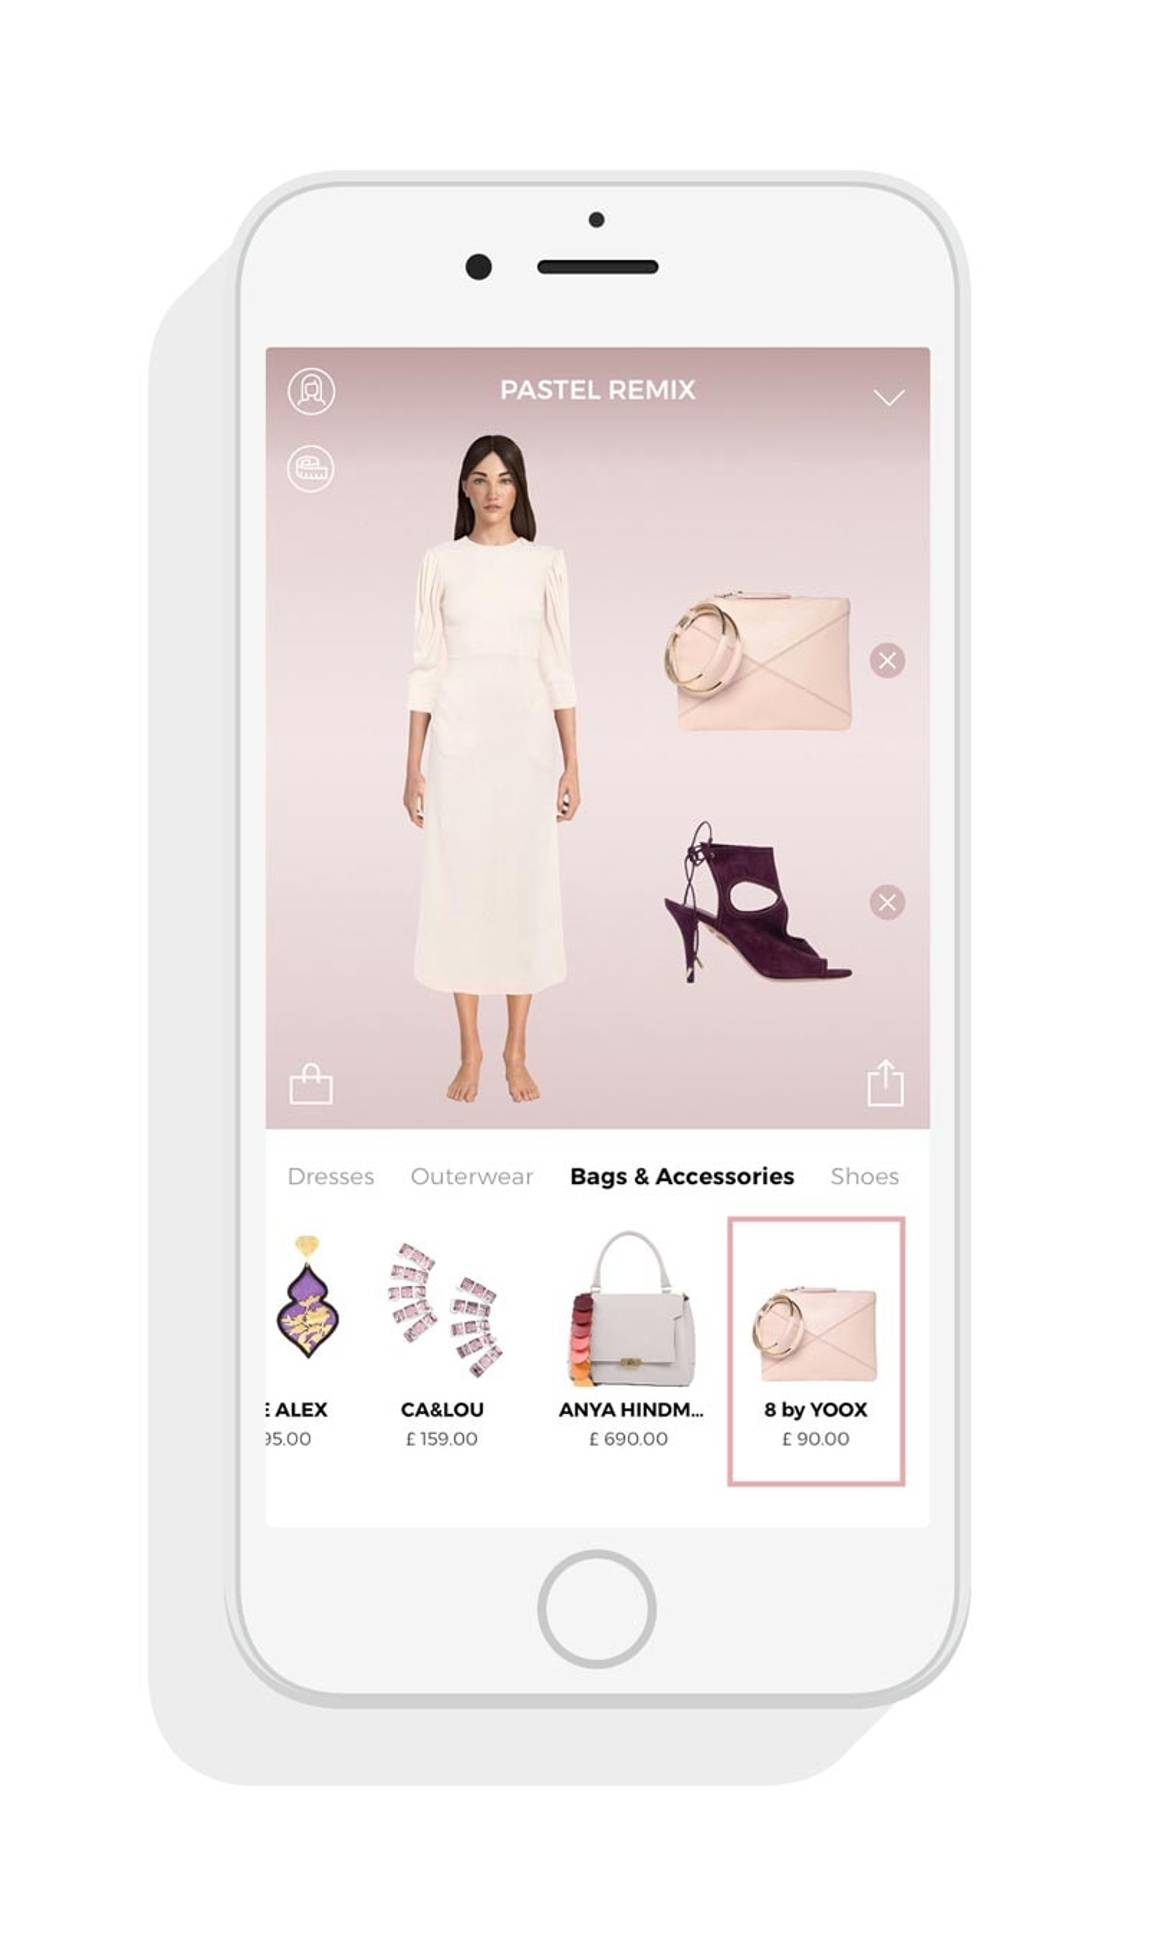 Yoox unveils AI-powered virtual styling suite